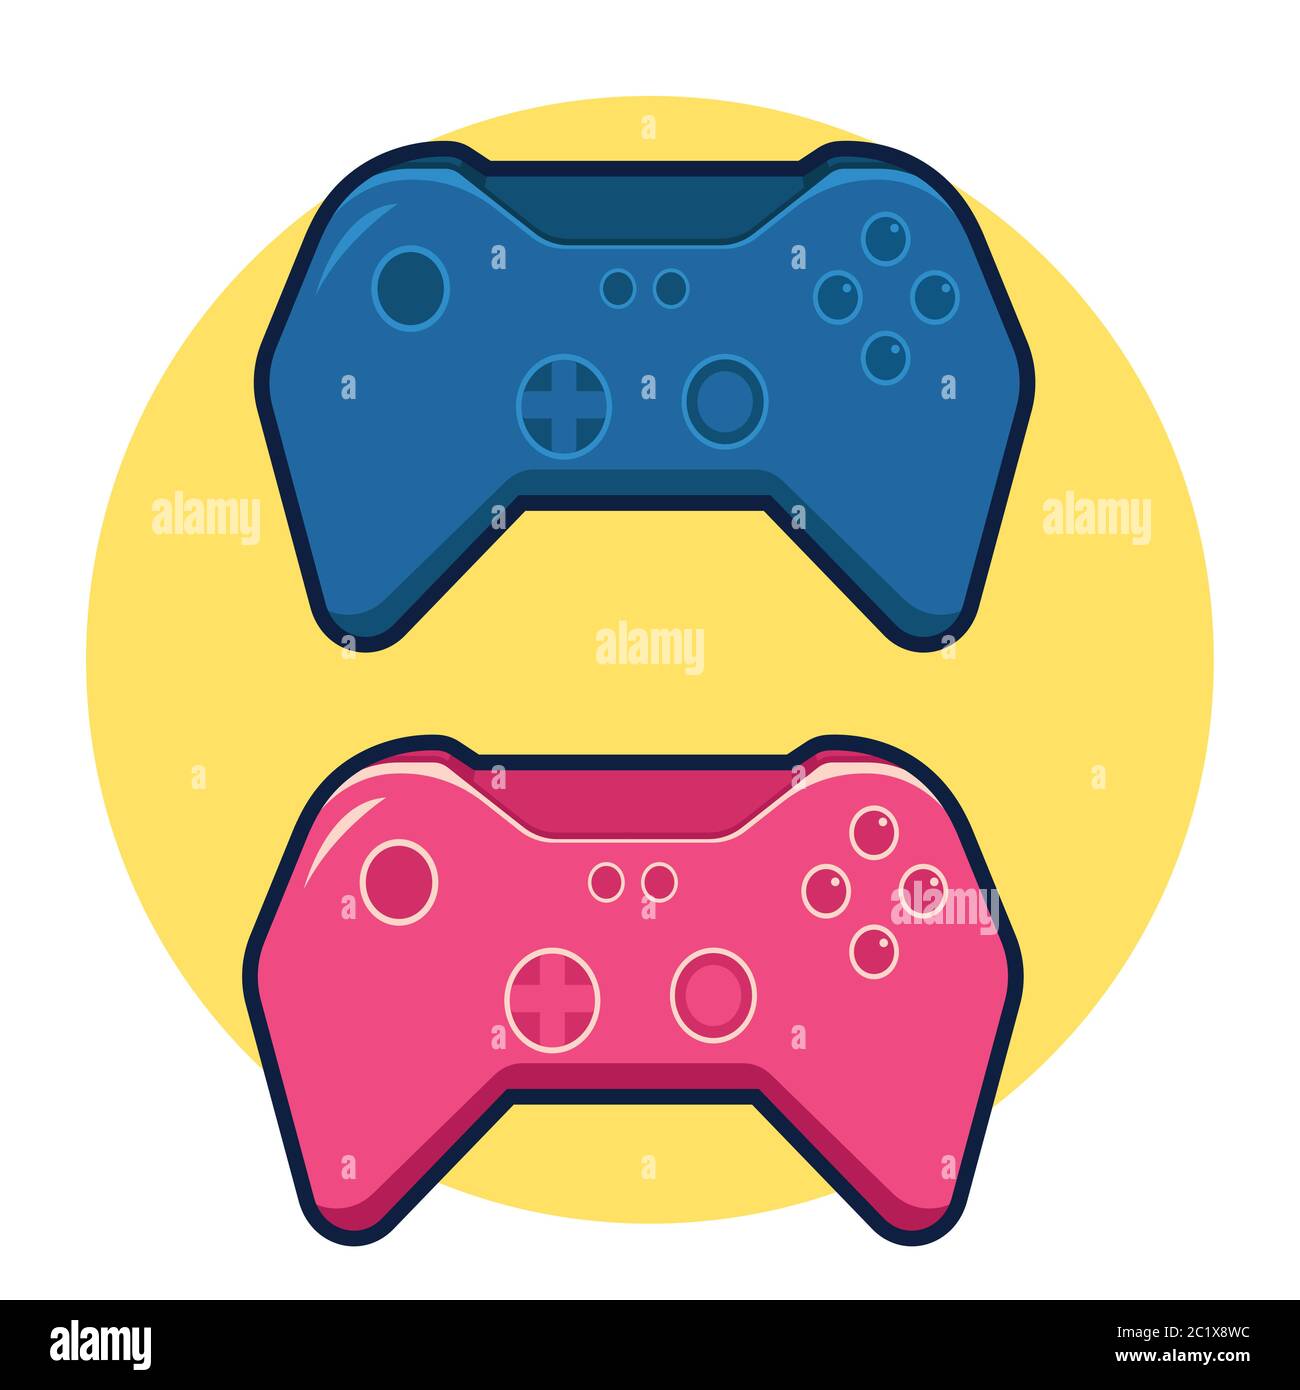 Video Game Console Vector Illustration. Flat Cartoon Style Stock Vector